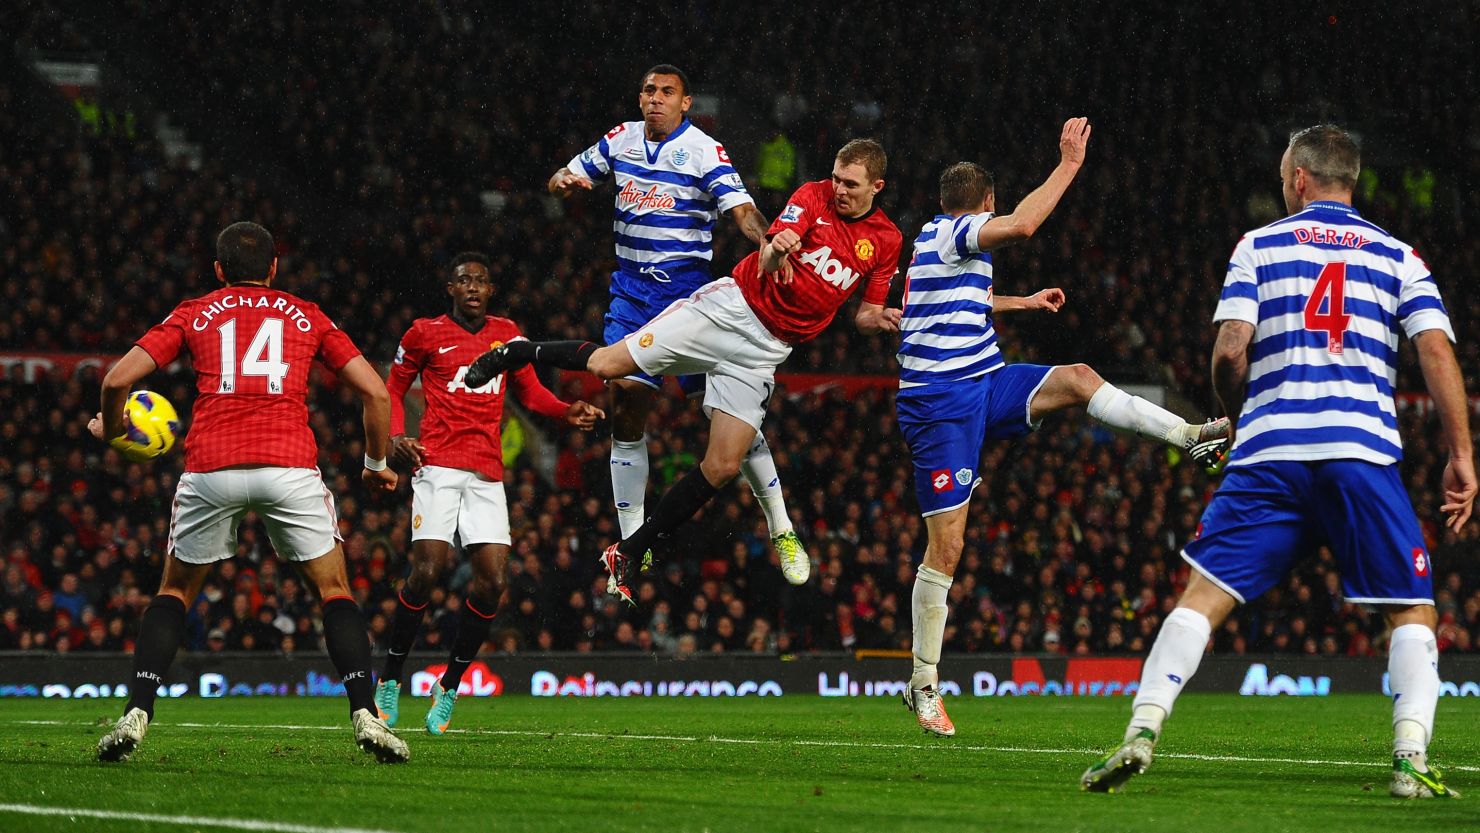 Darren Fletcher scores Manchester United's second goal in Saturday's 3-1 victory at home to QPR.